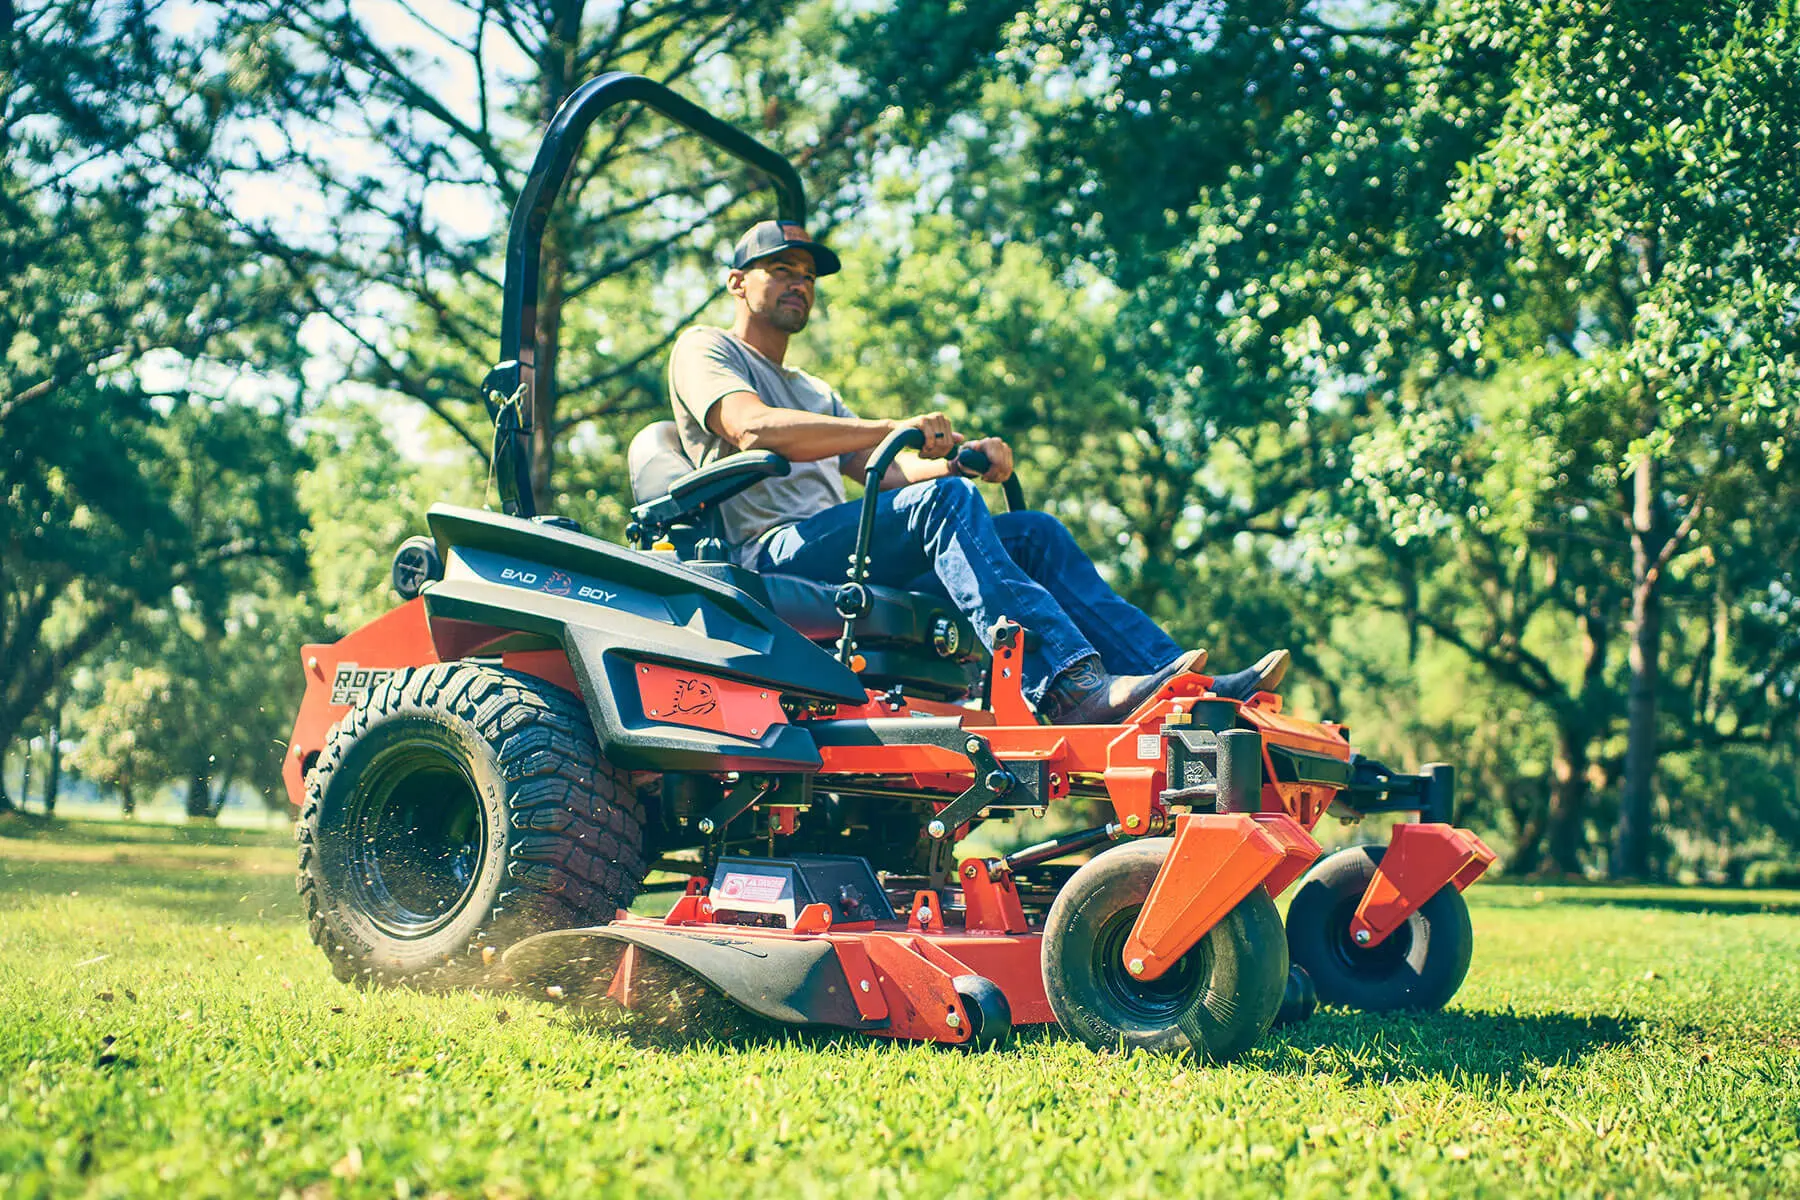 Browse Specs and more for the Outlaw Rouge Gas Mower - Bobcat of Indy